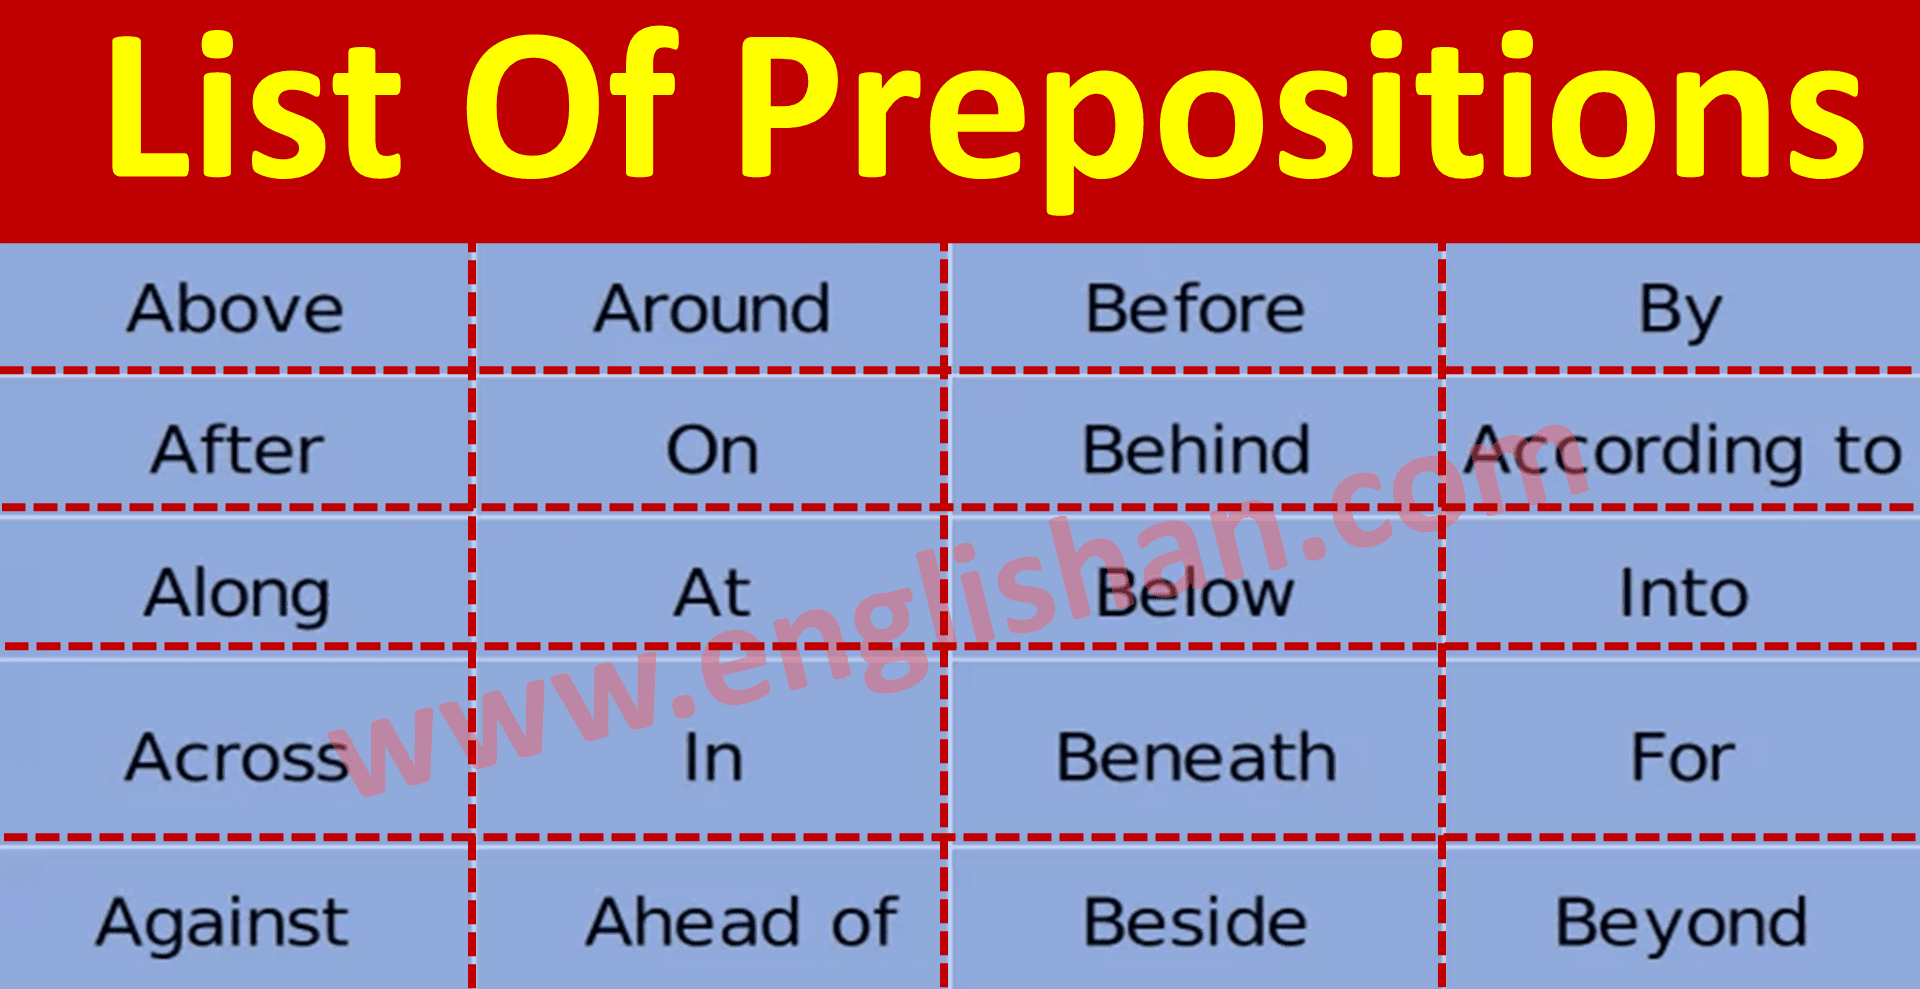 prepositions-definition-and-rules-with-example-englishan